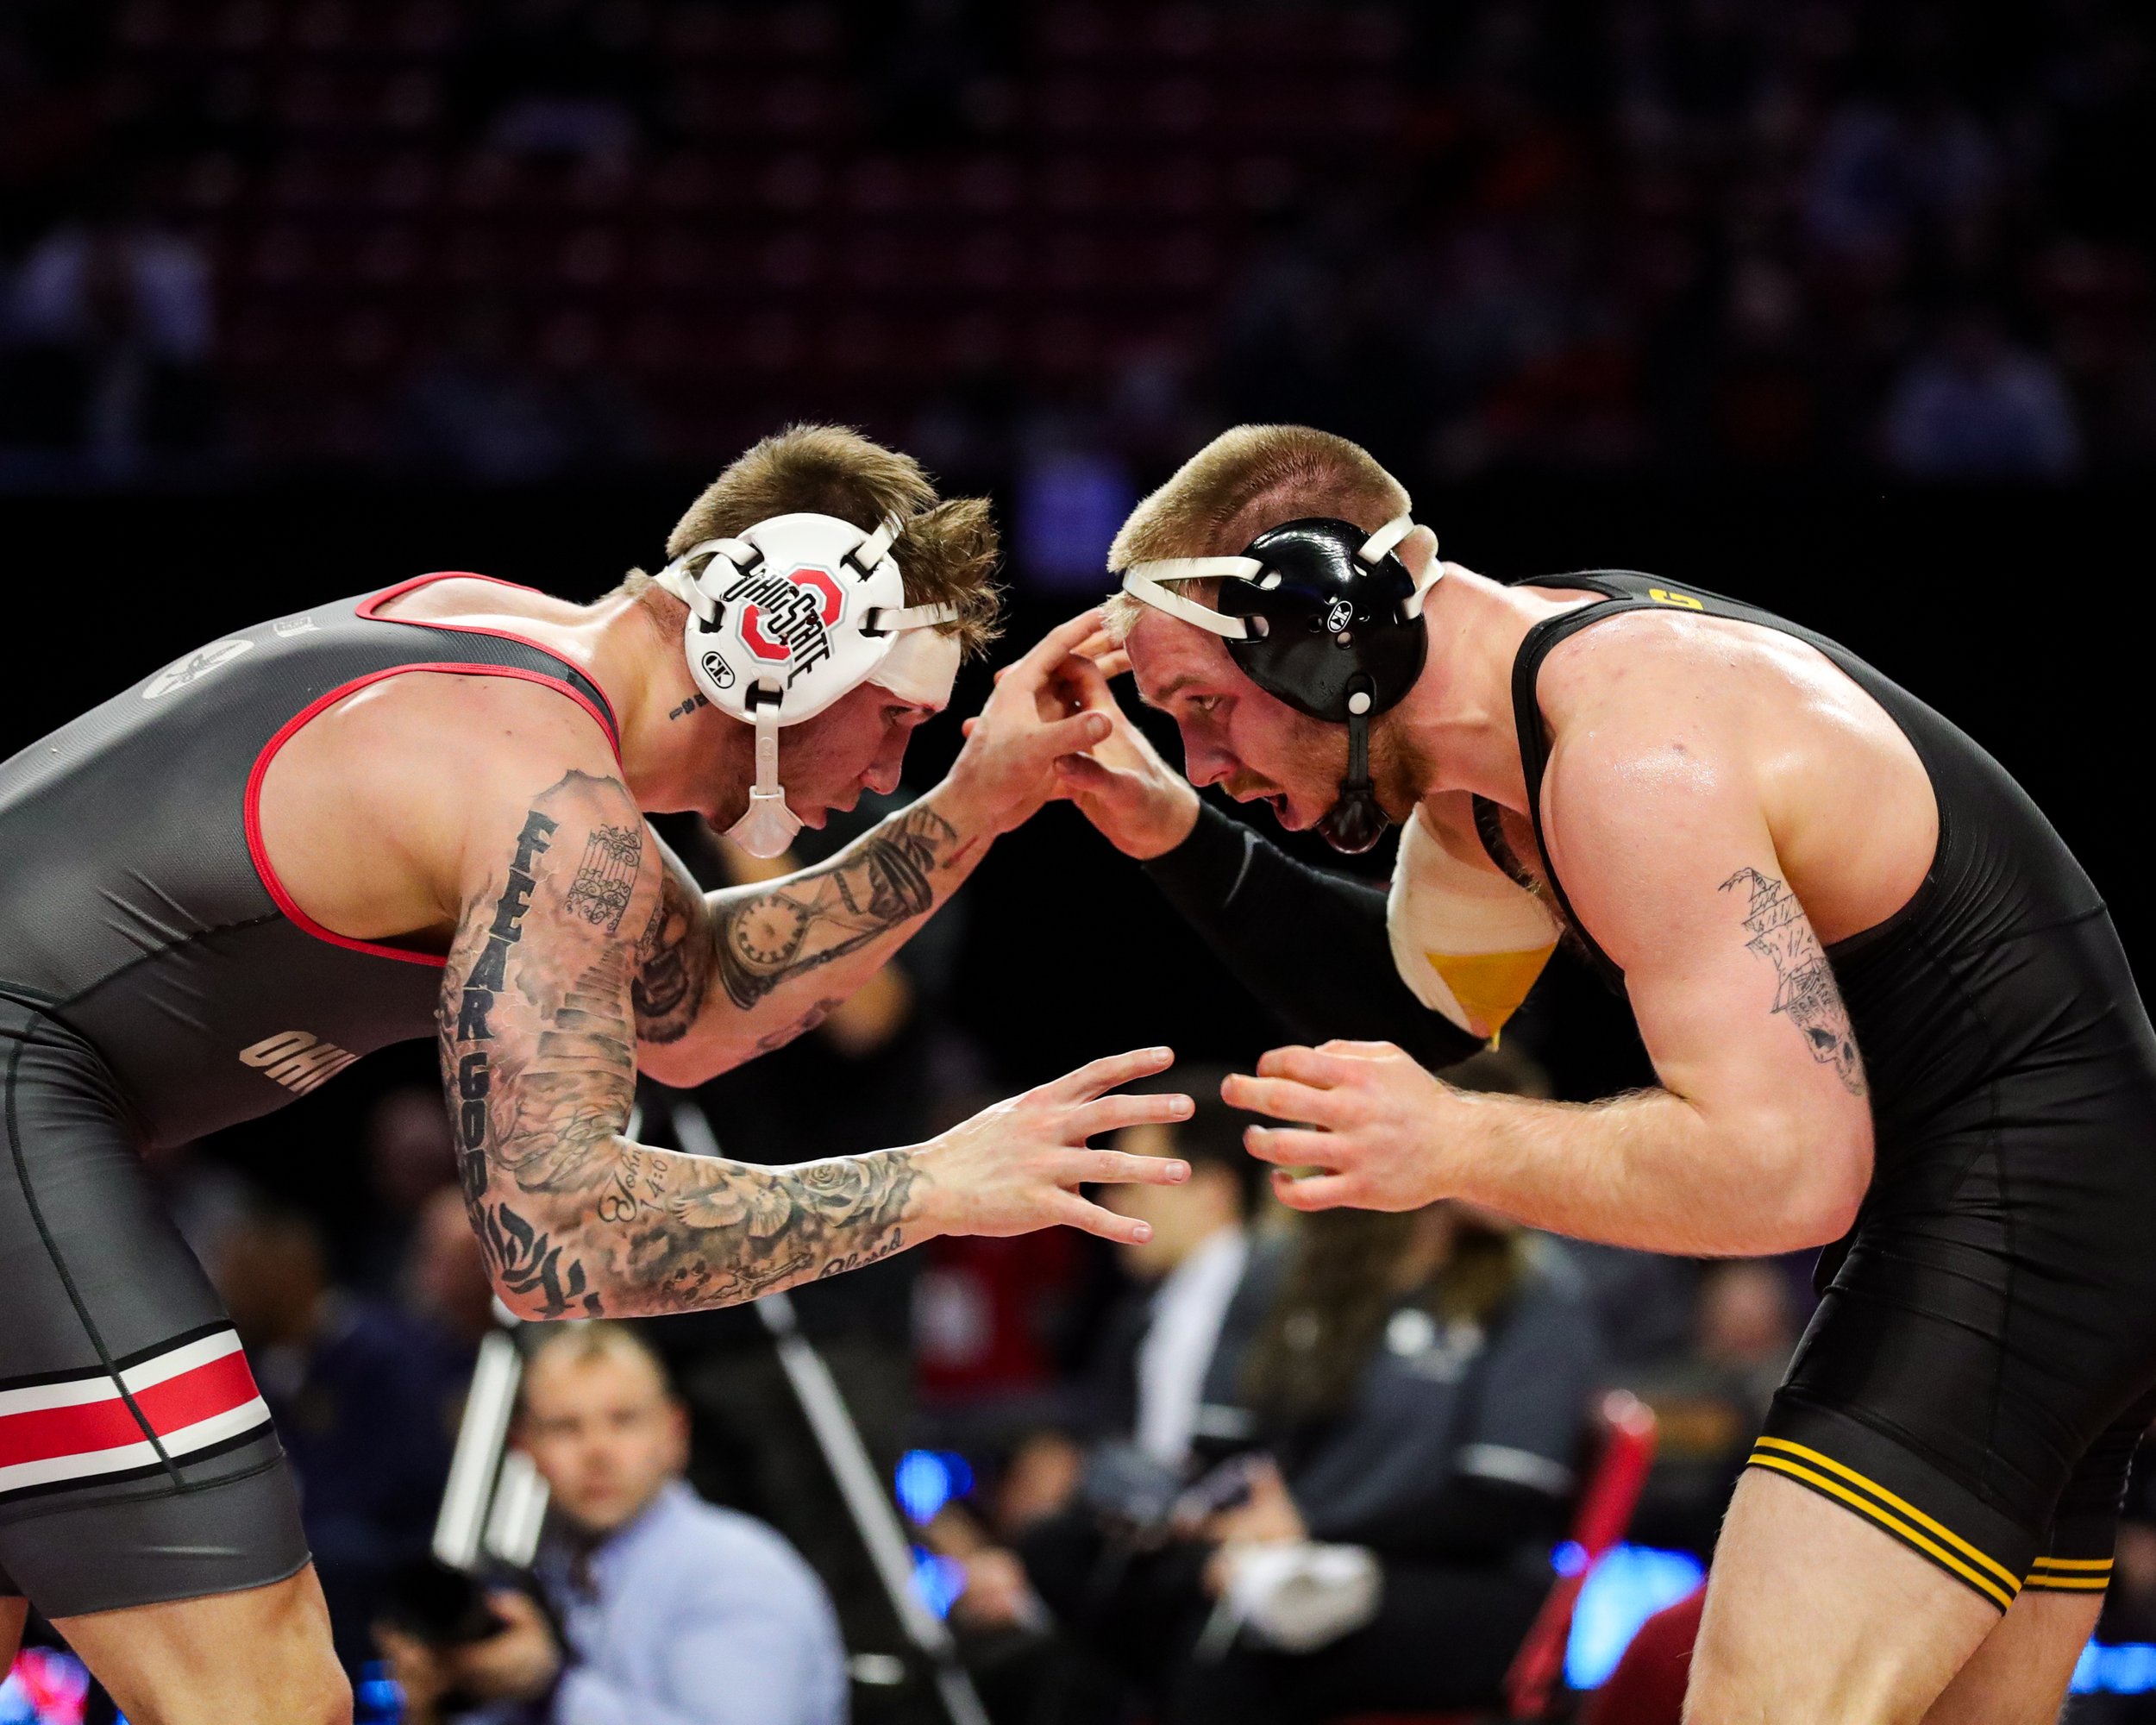  Iowa wrestler Patrick Kennedy grapples with Ohio State’s Rocco Welsh in a 174-lb semifinal consolation match during the Big Ten Wrestling Championships at the Xfinity Center in College Park, Maryland on Sunday, March 10, 2023. Kennedy lost 4-1. (Dav